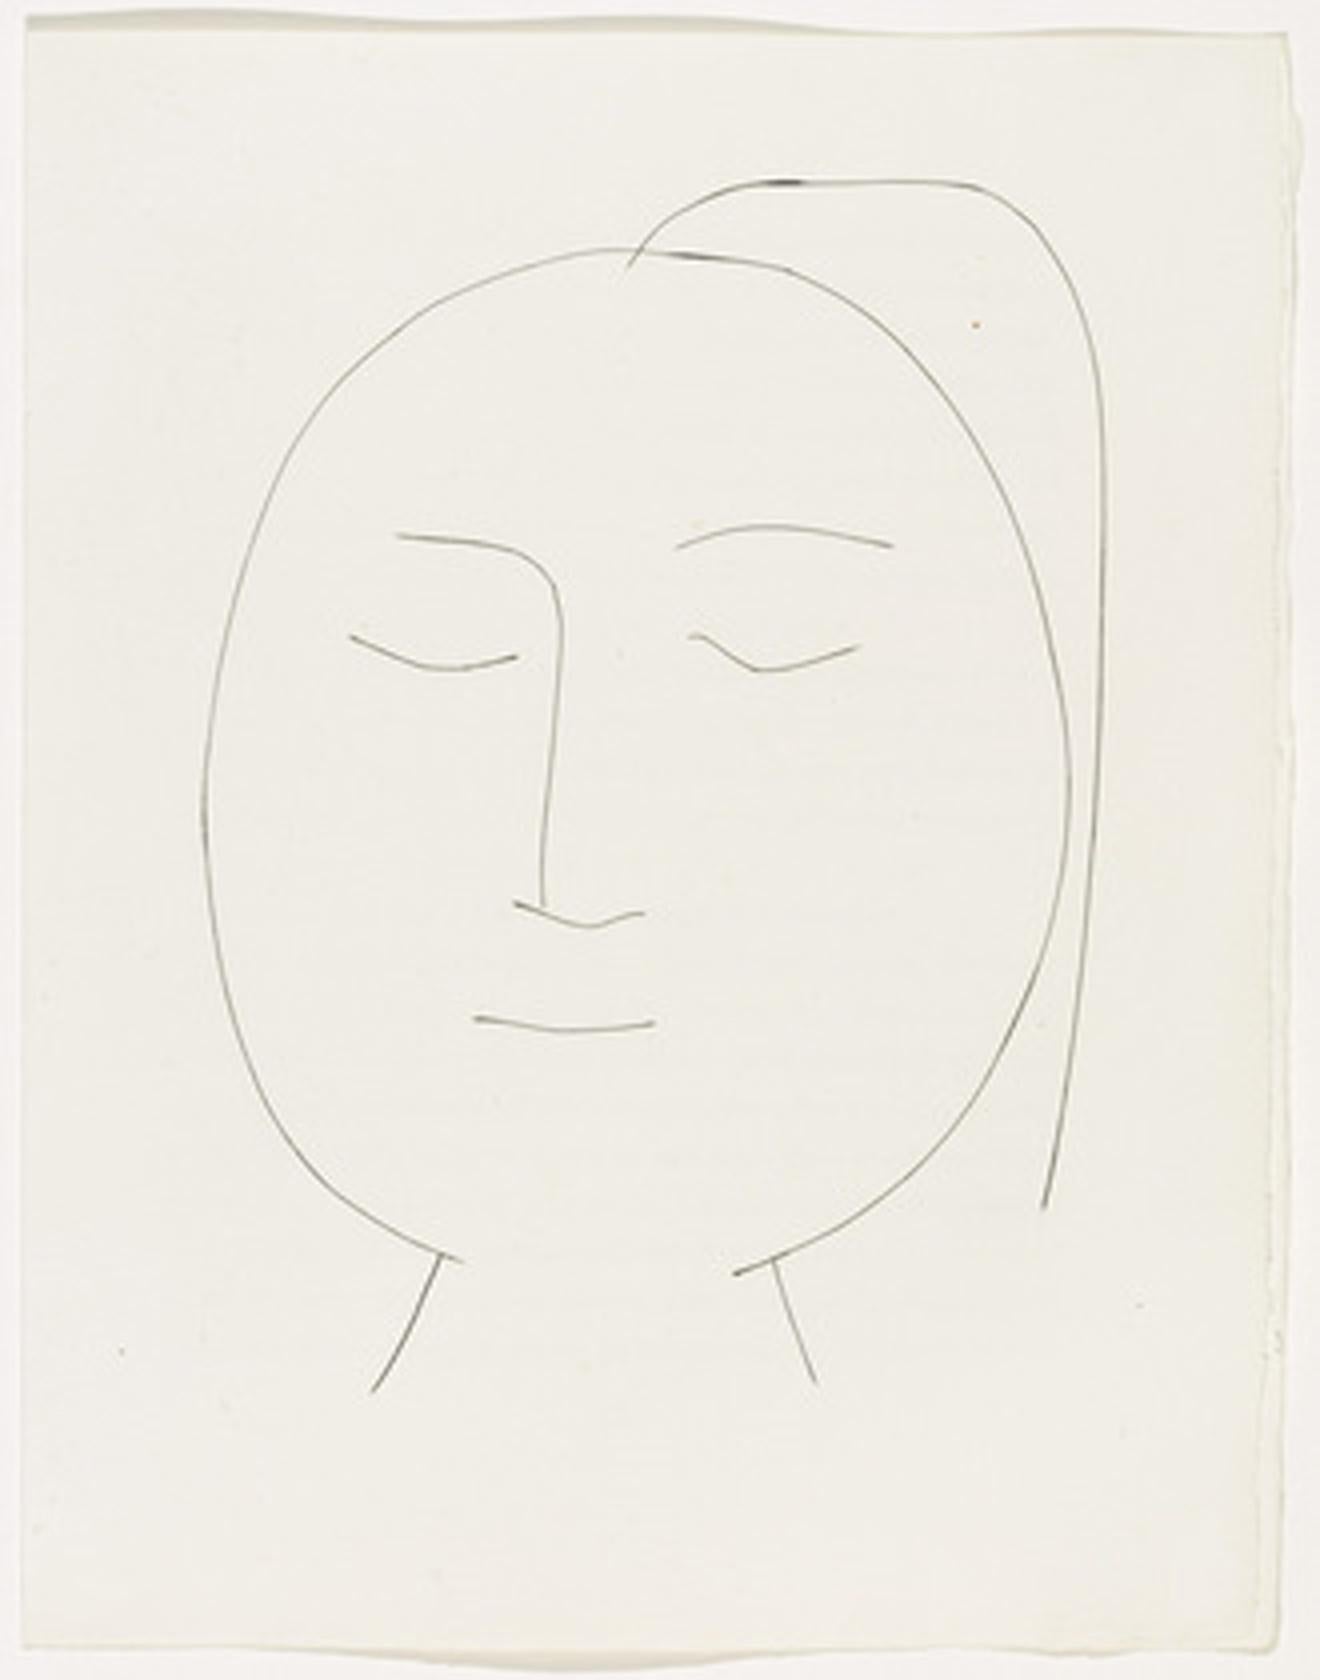 Pablo Picasso Portrait Print - Carmen Oval Head of a Woman with Hair (Plate XIX)